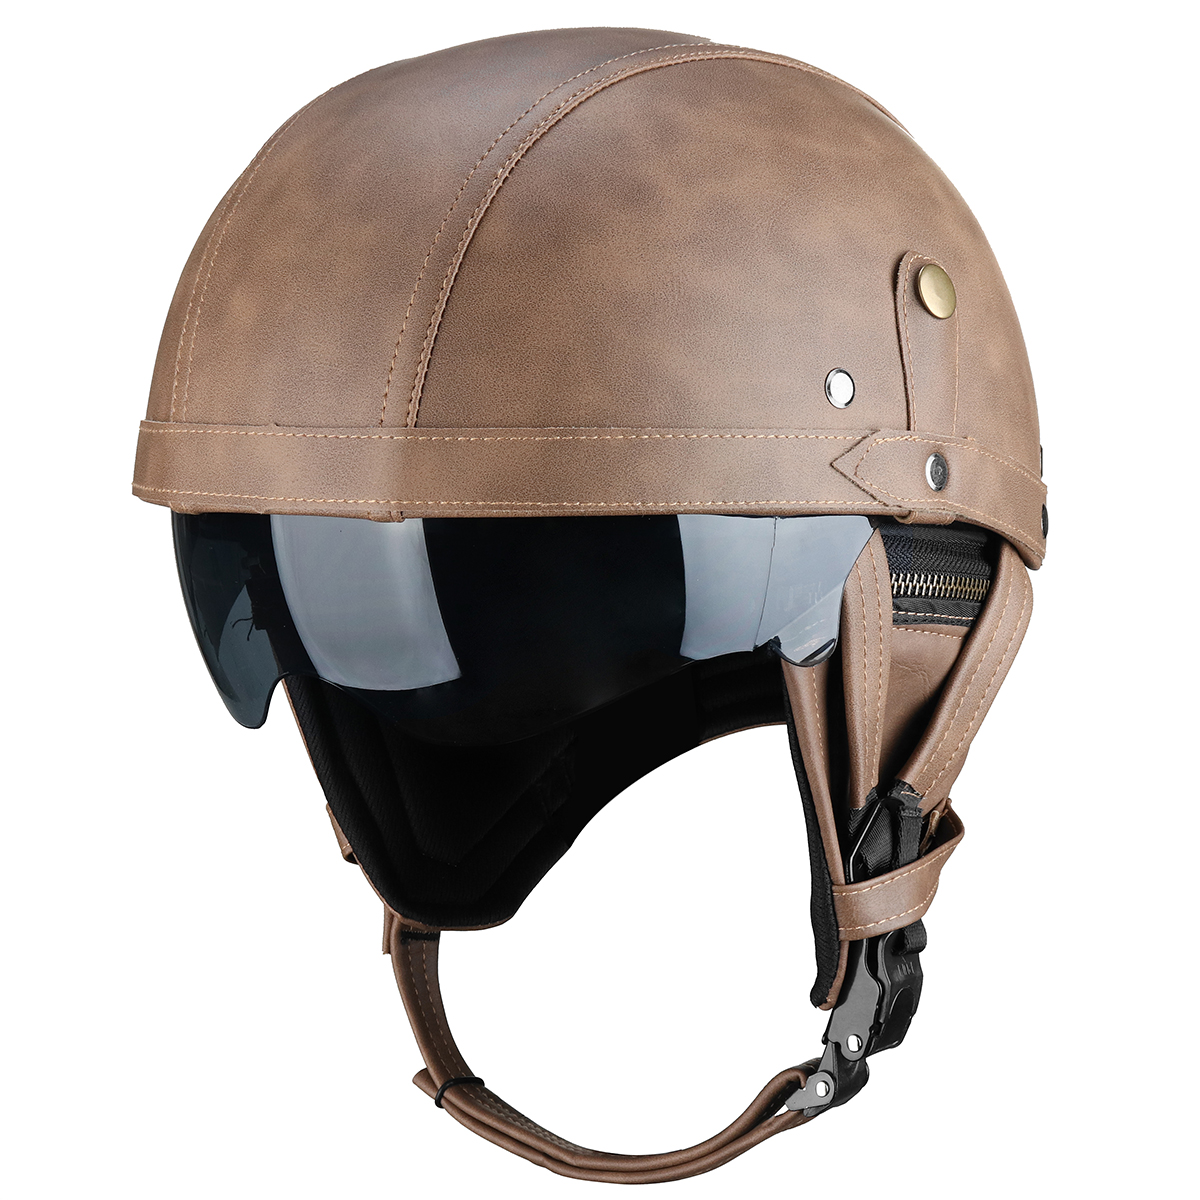 

Vintage Leather Half Face Motorcycle Touring Helmet Cruiser Scooter Brown/Black